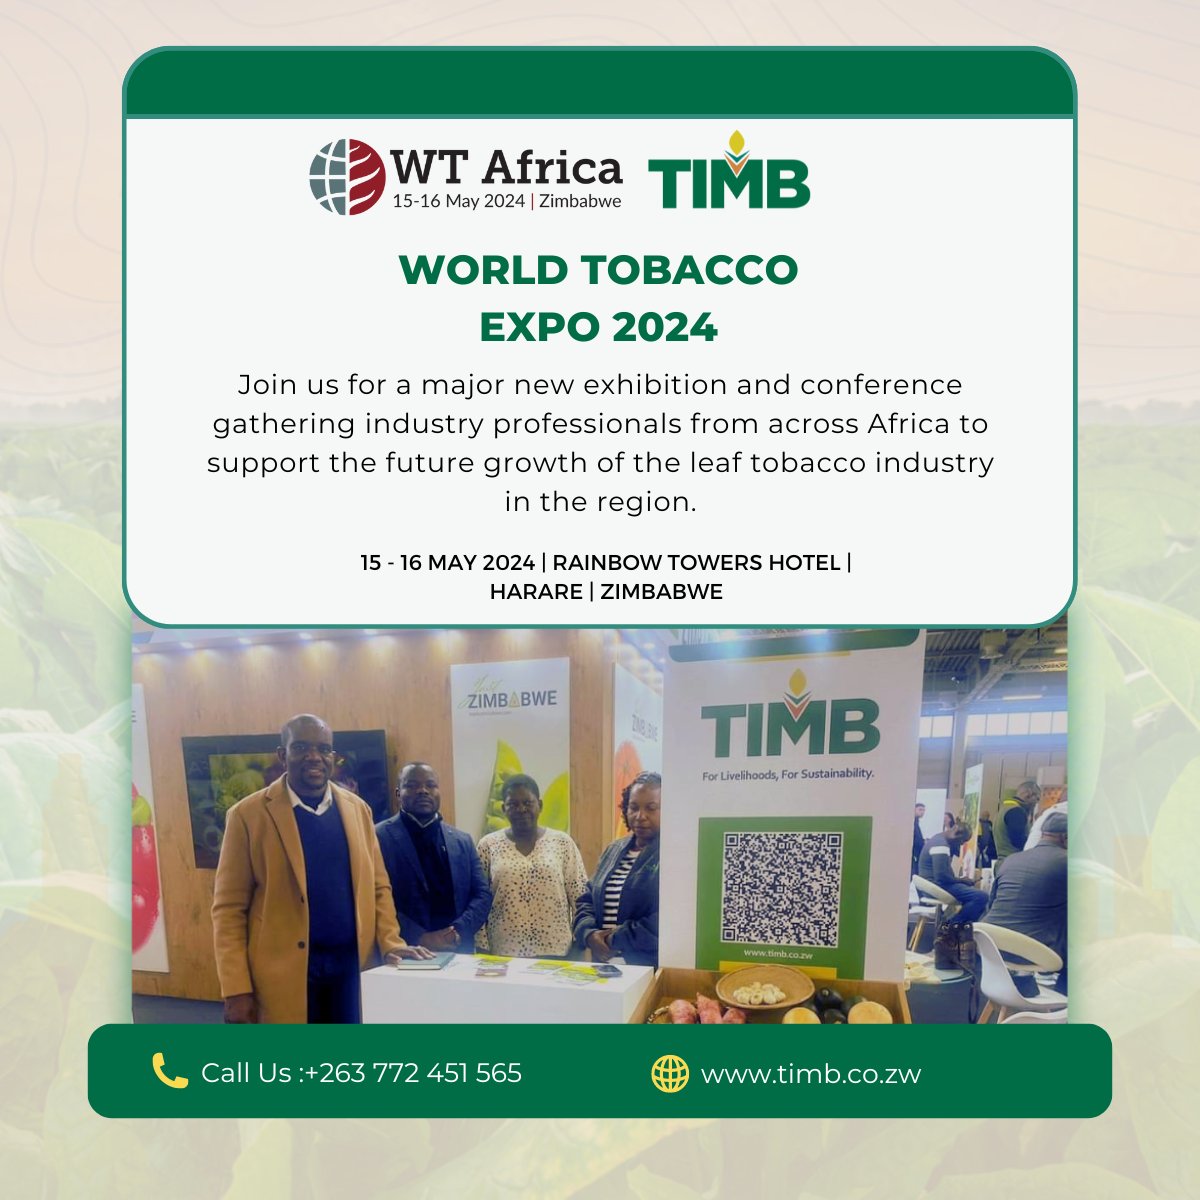 Join me for the Expo, register today!!

#wtafrica24 #Zimbabwe #harare #forlivelihoods #forsustainability #Dubai #tobaccoindustry #networking #worldtobacco #eventprofs #b2bevents #events #tobacconetwork #tobaccosector #eventsindustry #b2b #networking #discoverunder1k #tobacco